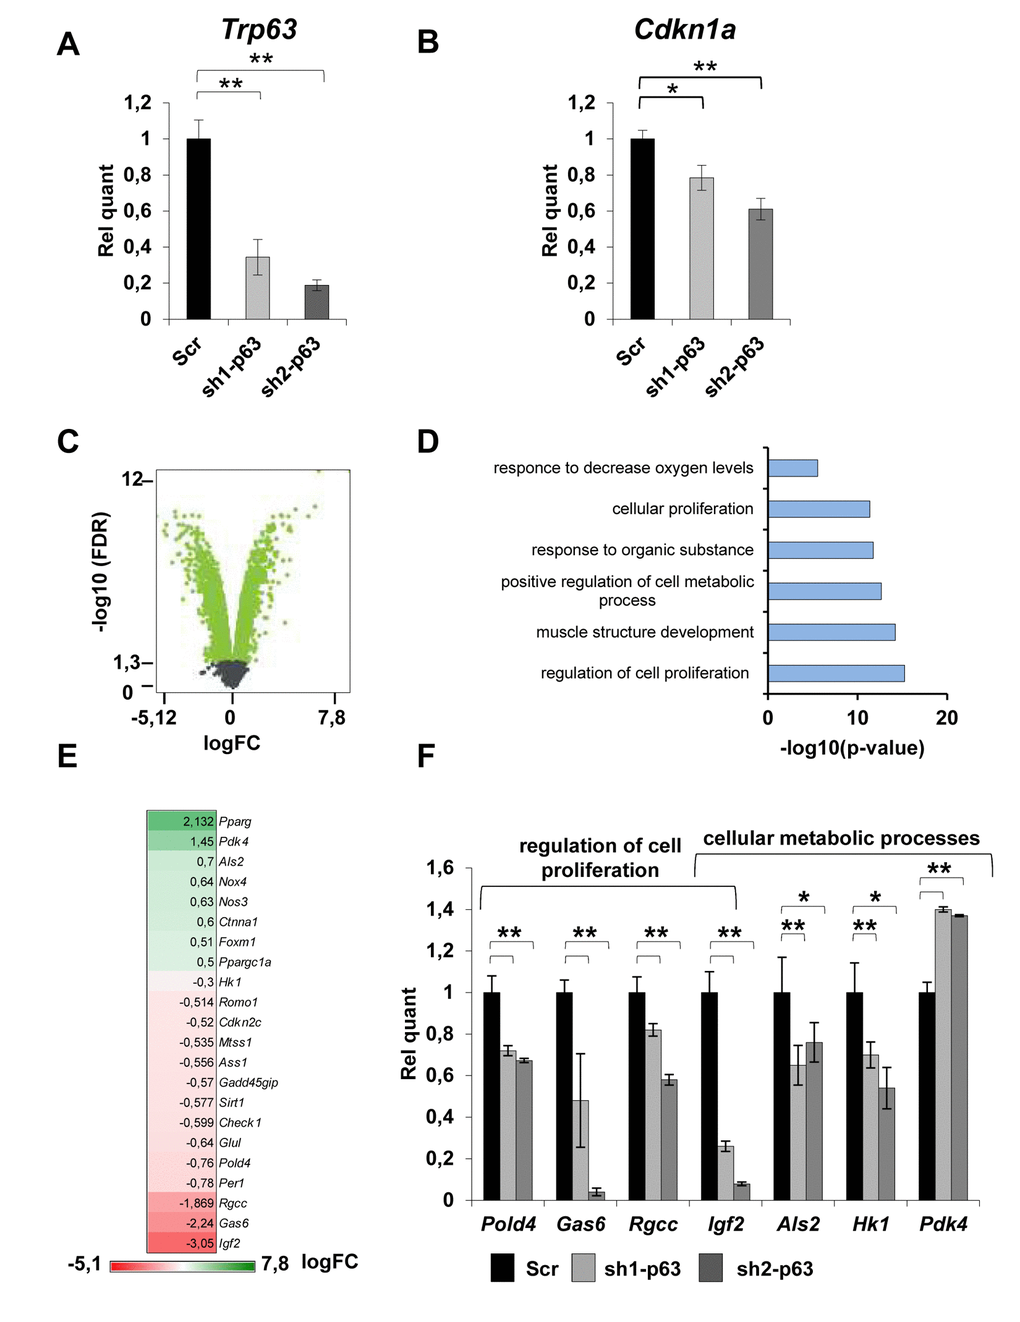 TAp63 knock-down affects the expression of genes involved in proliferation and metabolism. (A) RT-qPCR of p63 mRNA (Trp63) and (B) p21 (Cdkn1a) performed in proliferating Scr, sh1-p63 and sh2-p63 clones. Results are shown as average of three experiments ± s.d. *pC) Volcano plot showing -log10(FDR) in function of the log2(FC) for coding genes in Scr and sh1-p63. Green points indicate significantly expressed genes (D) GO terms of microarray performed on significantly modulated genes in C2C7 myoblasts (C). Panther was used for biological process (<a href="http://pantherdb.org" target="